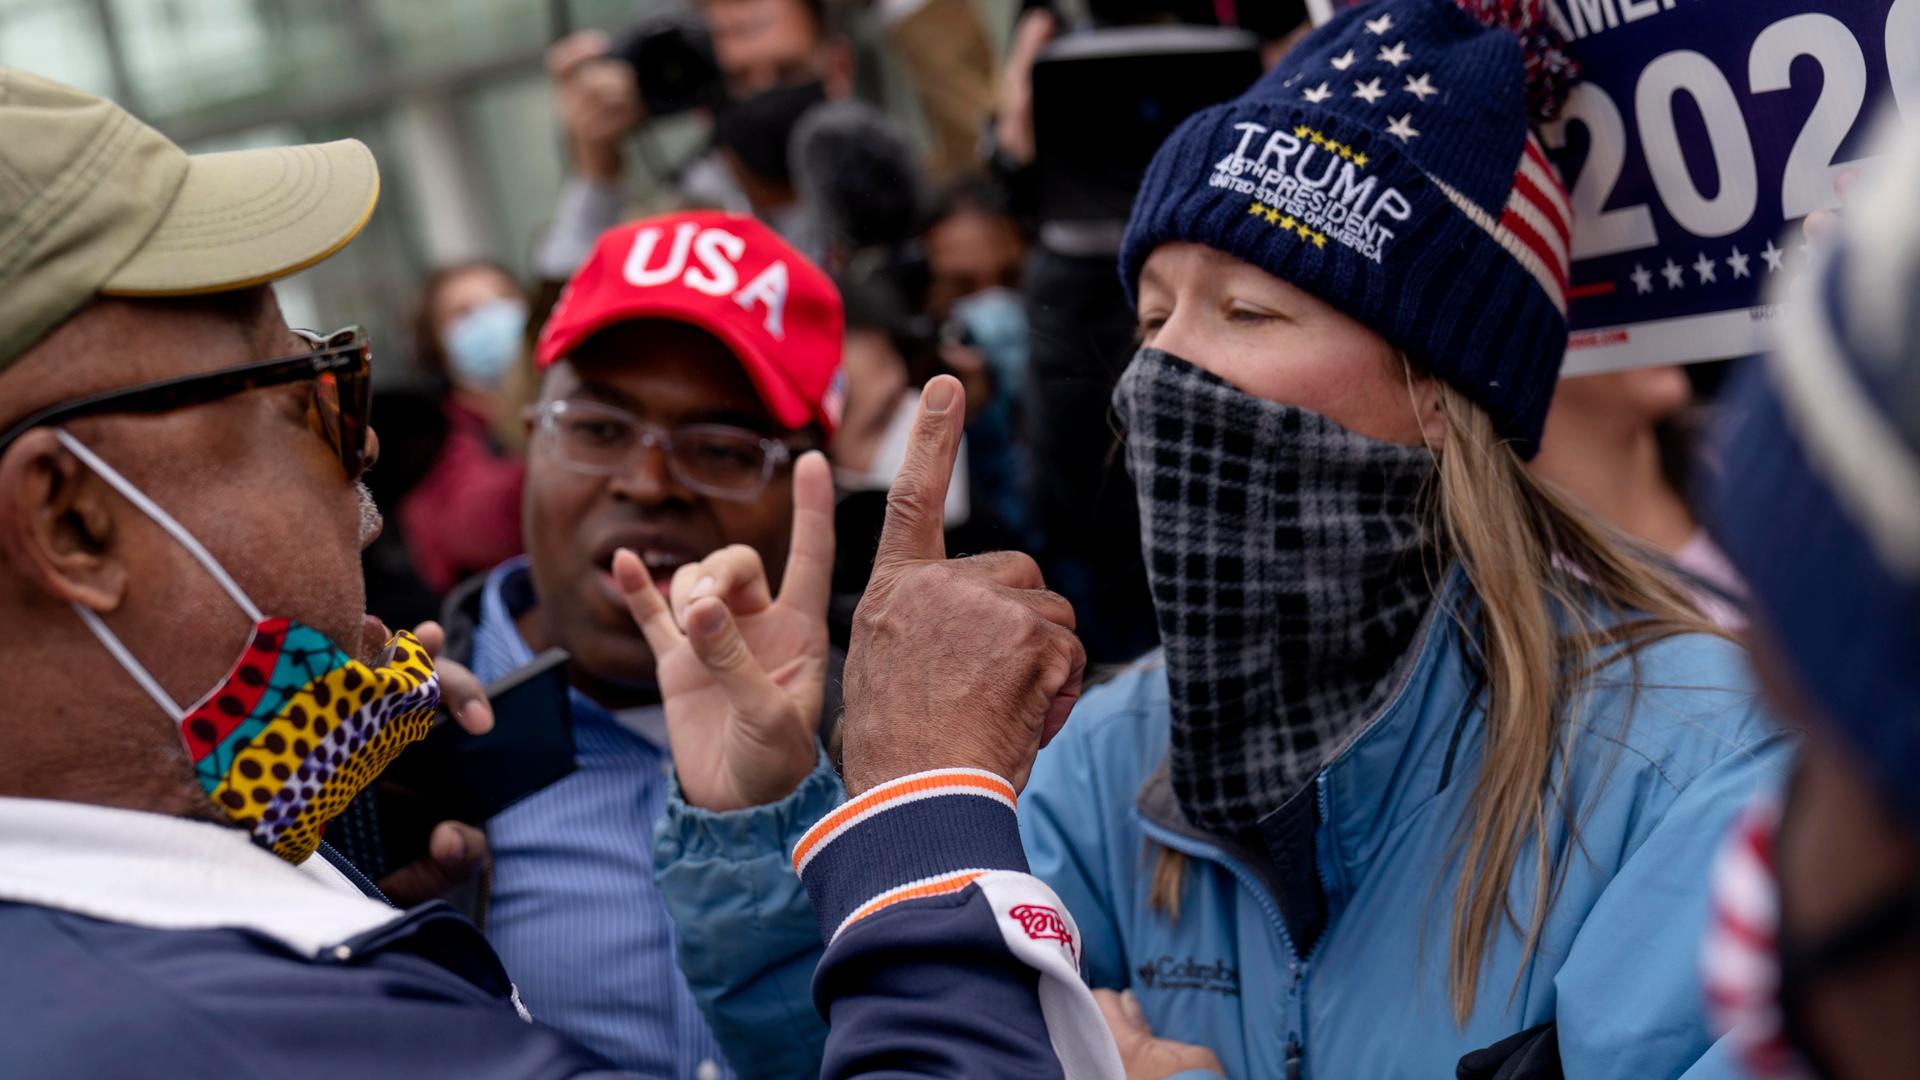 Trump supporters at right argue with a counterprotester at left as they protest election results outside the central counting board at the TCF Center in Detroit, Michigan, Nov. 5, 2020.